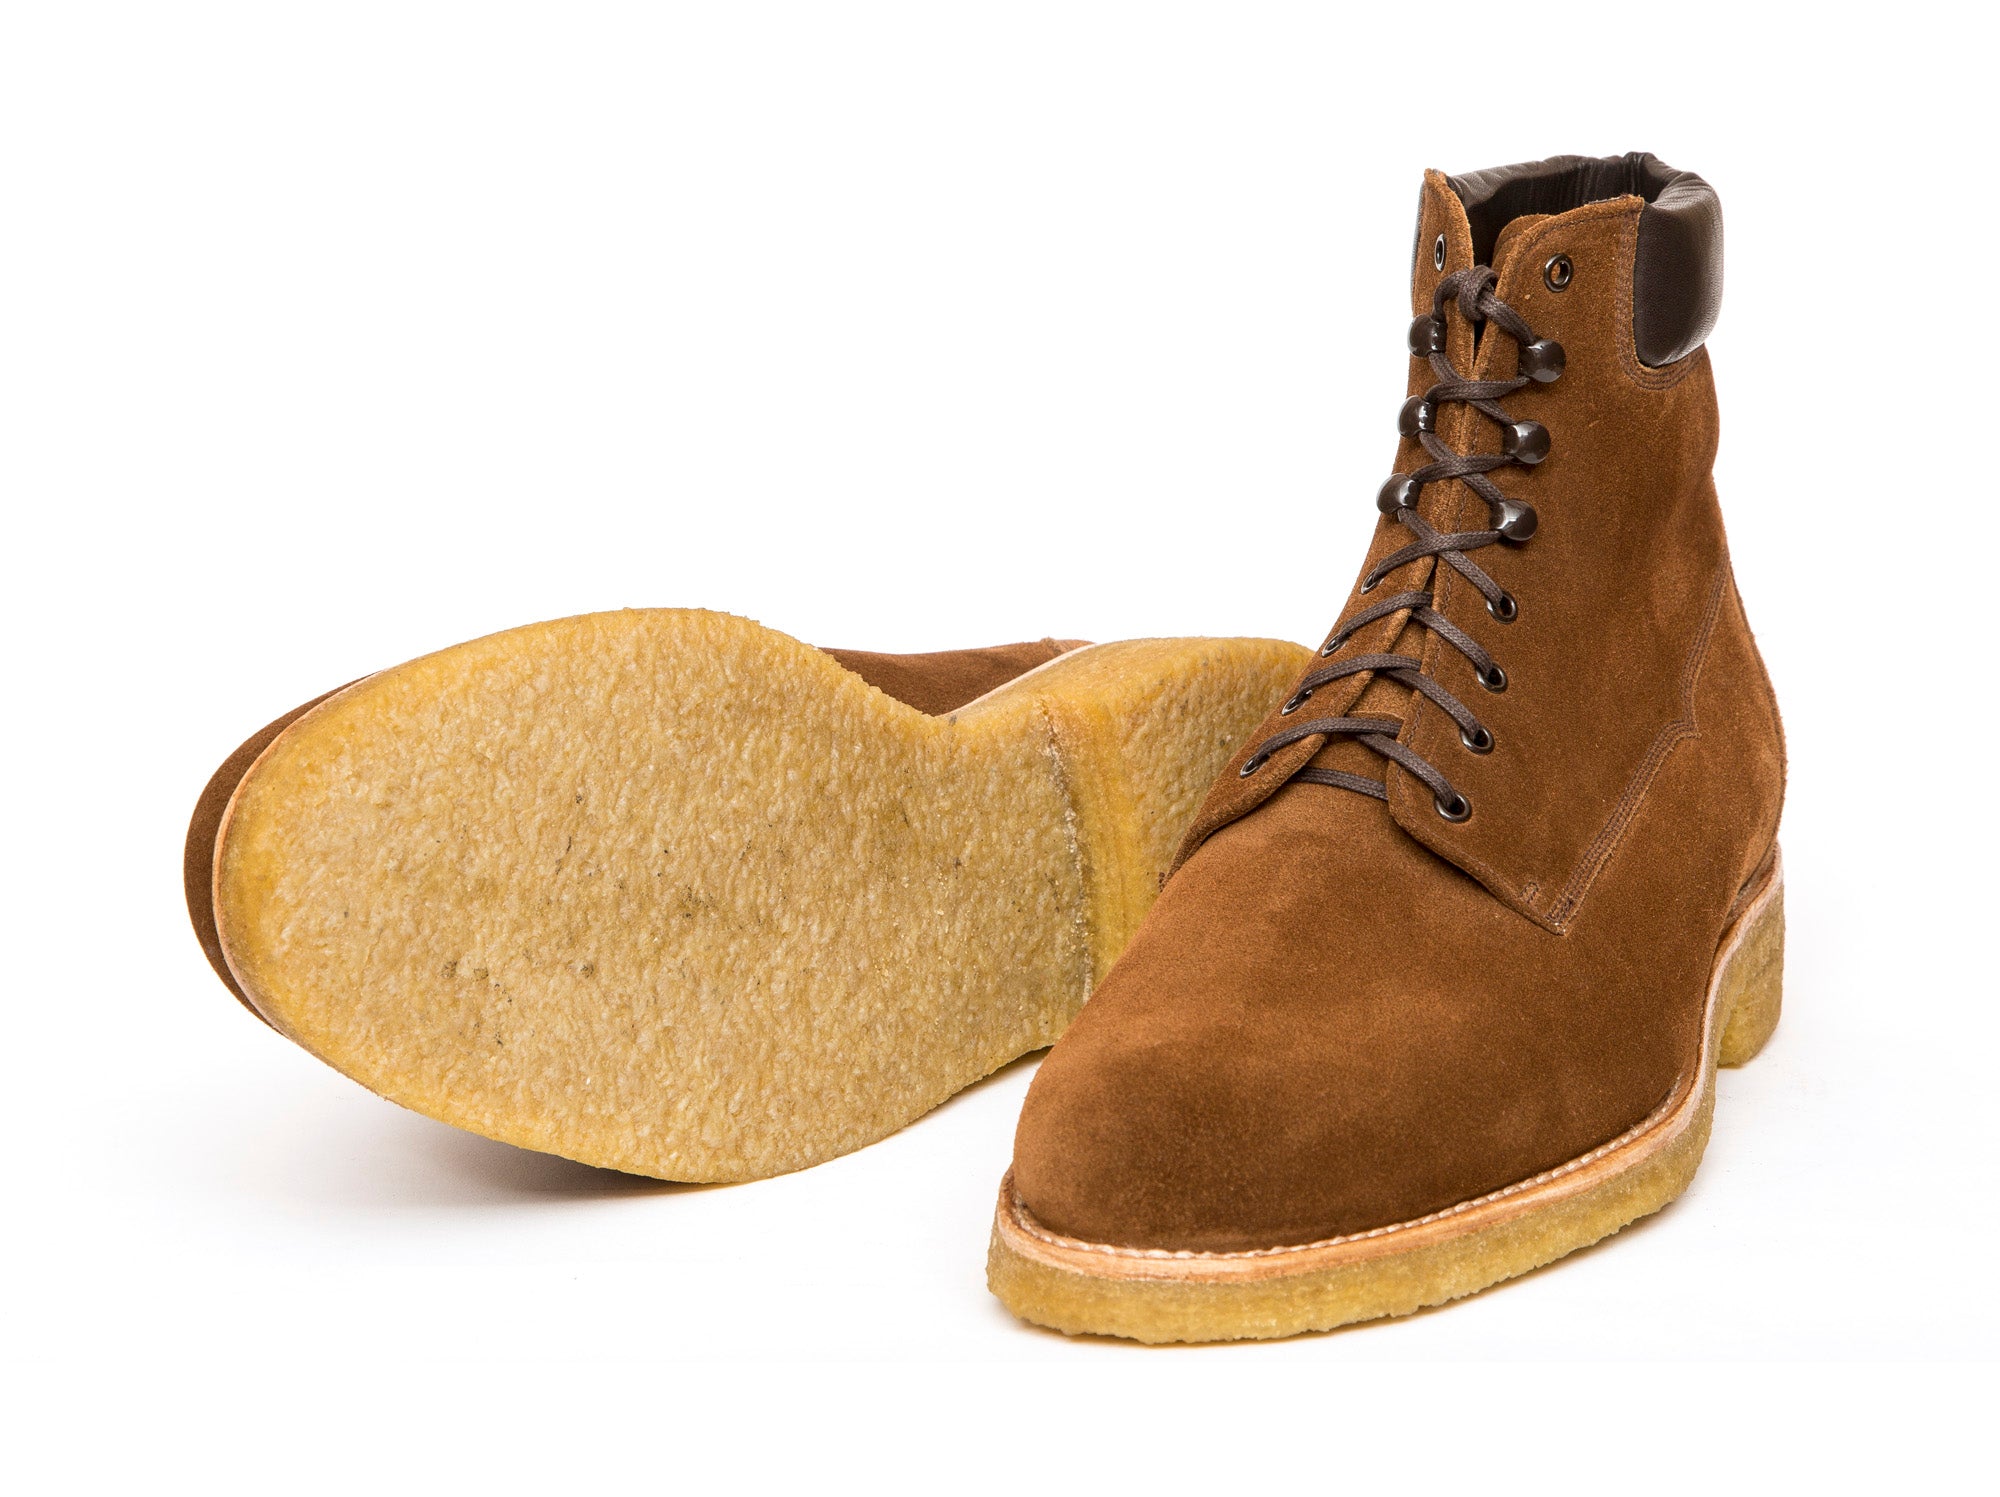 Whidbey - MTO - Snuff Suede - NJF Last - Crepe Rubber Sole